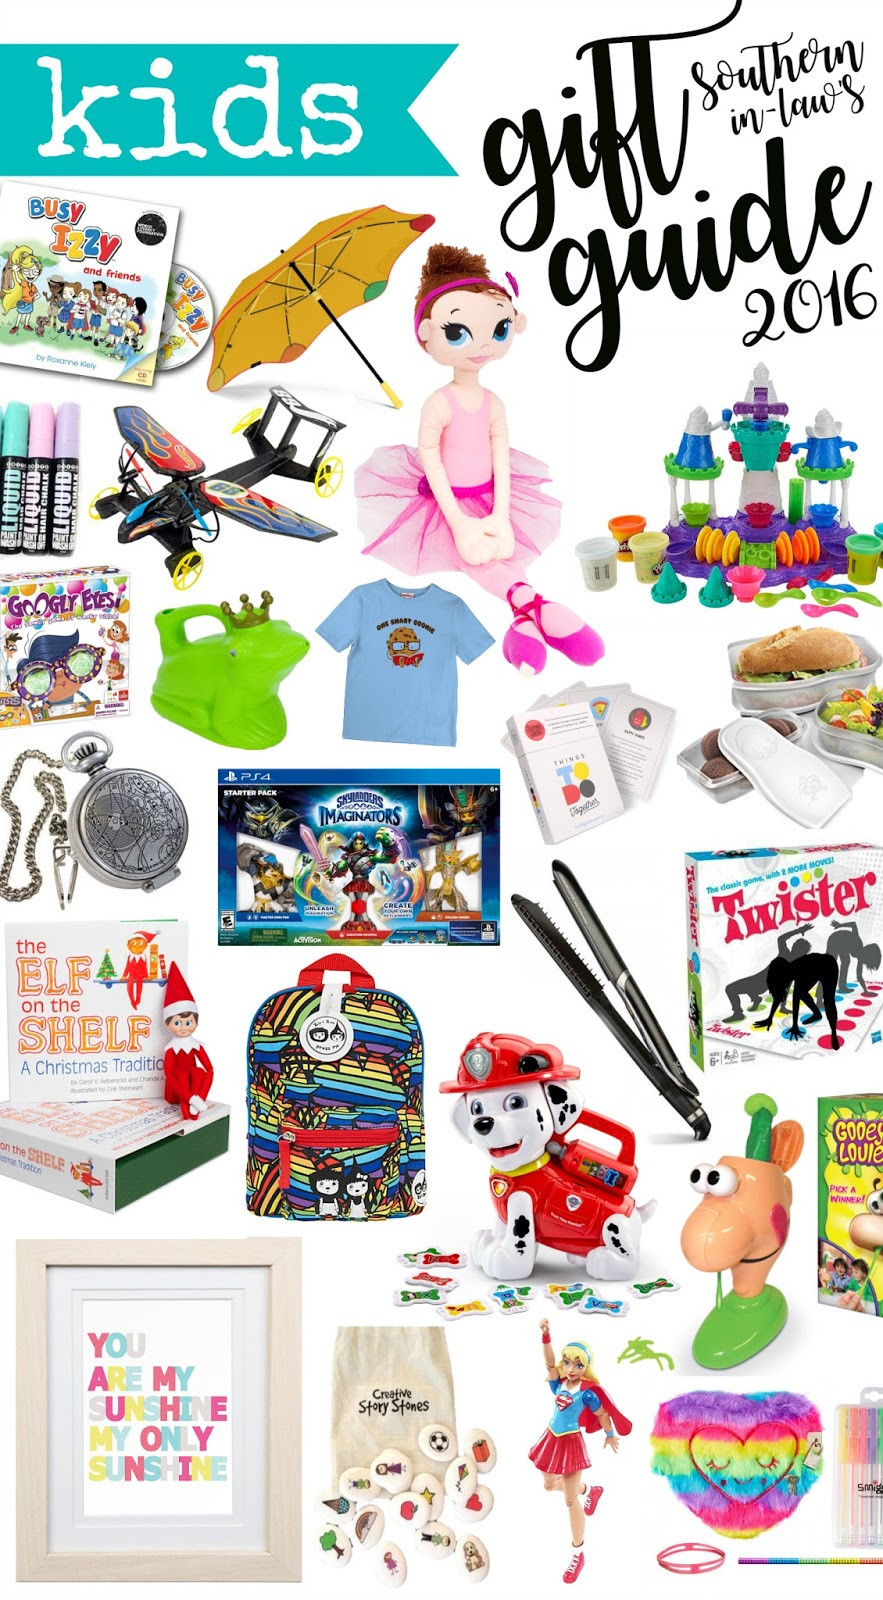 Top Xmas Gifts For Kids
 Southern In Law 2016 Kids Christmas Gift Guide